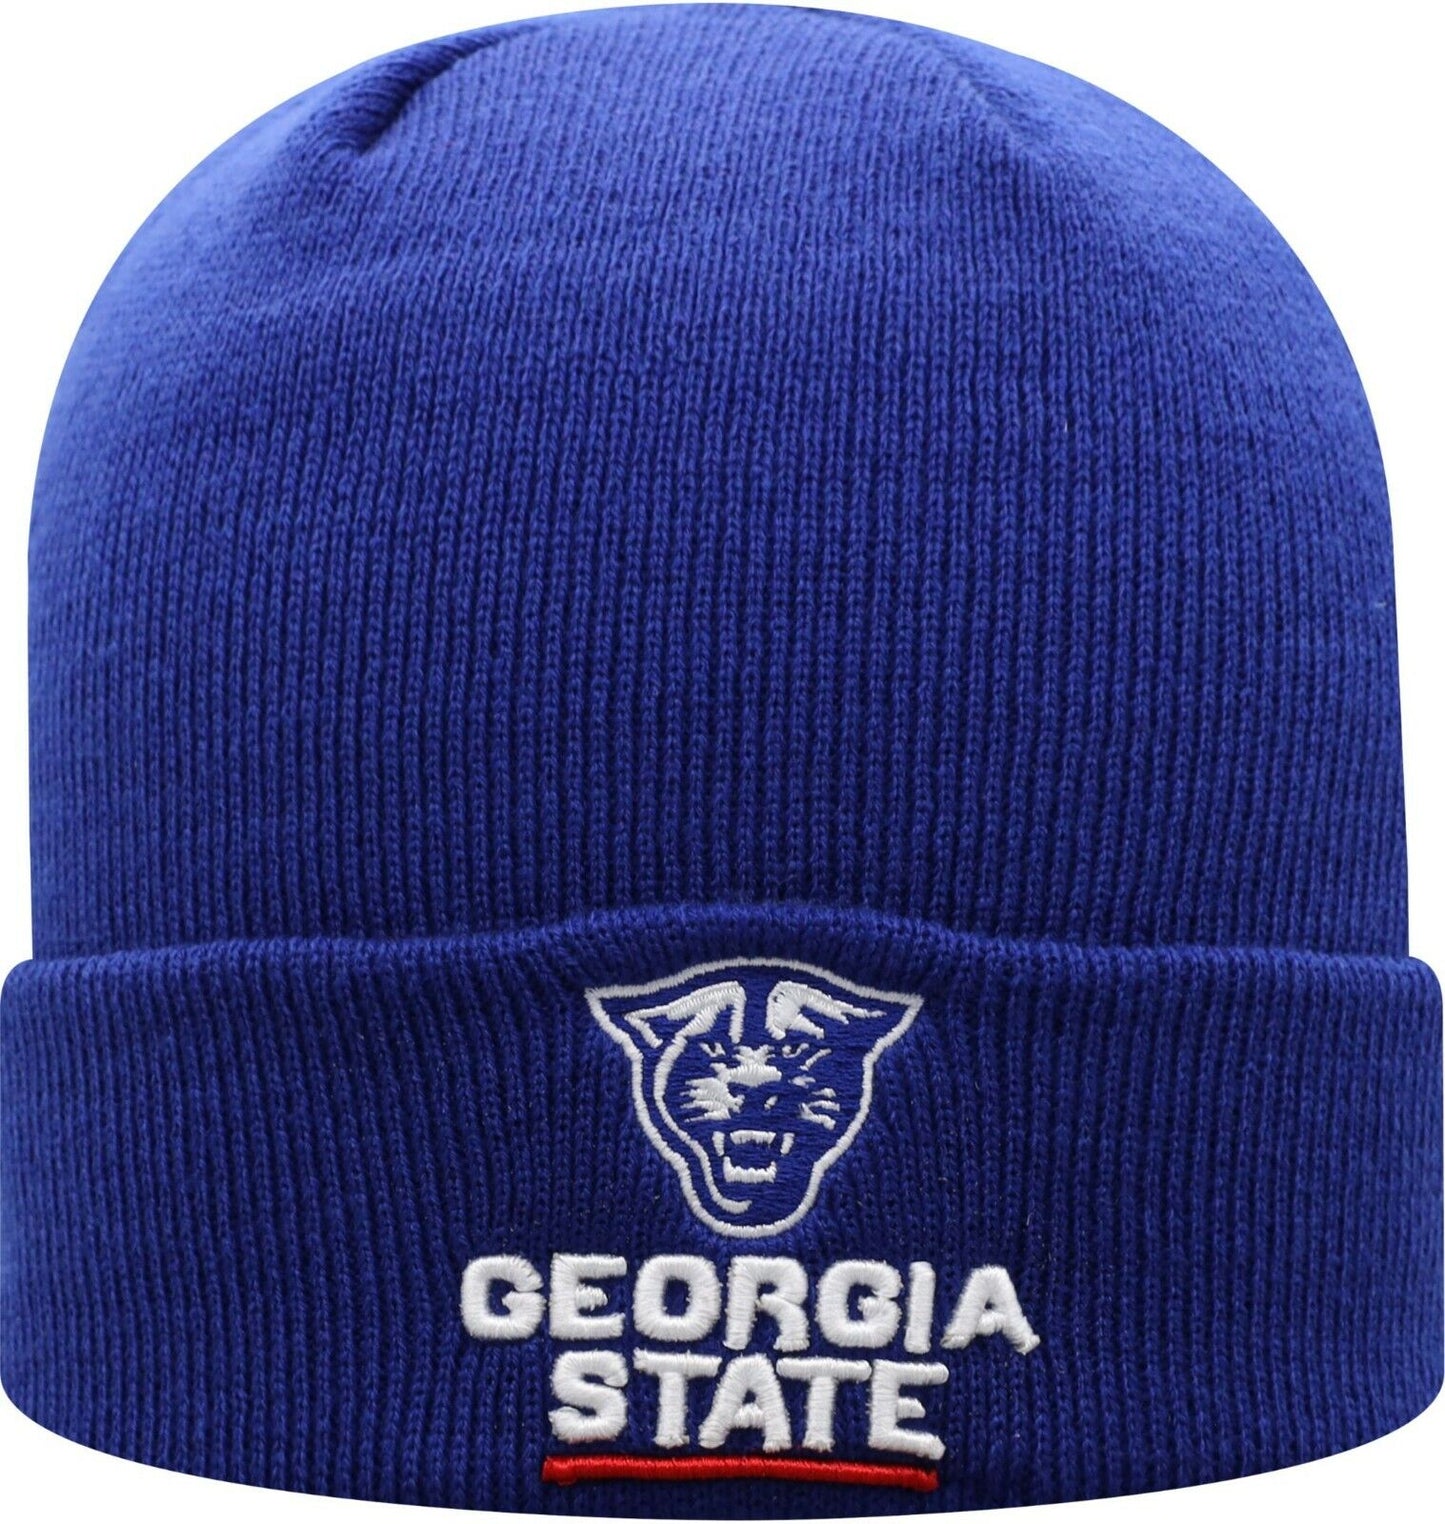 Georgia State Panthers Royal Blue Top of the World Cuff Knit Beanie Ha